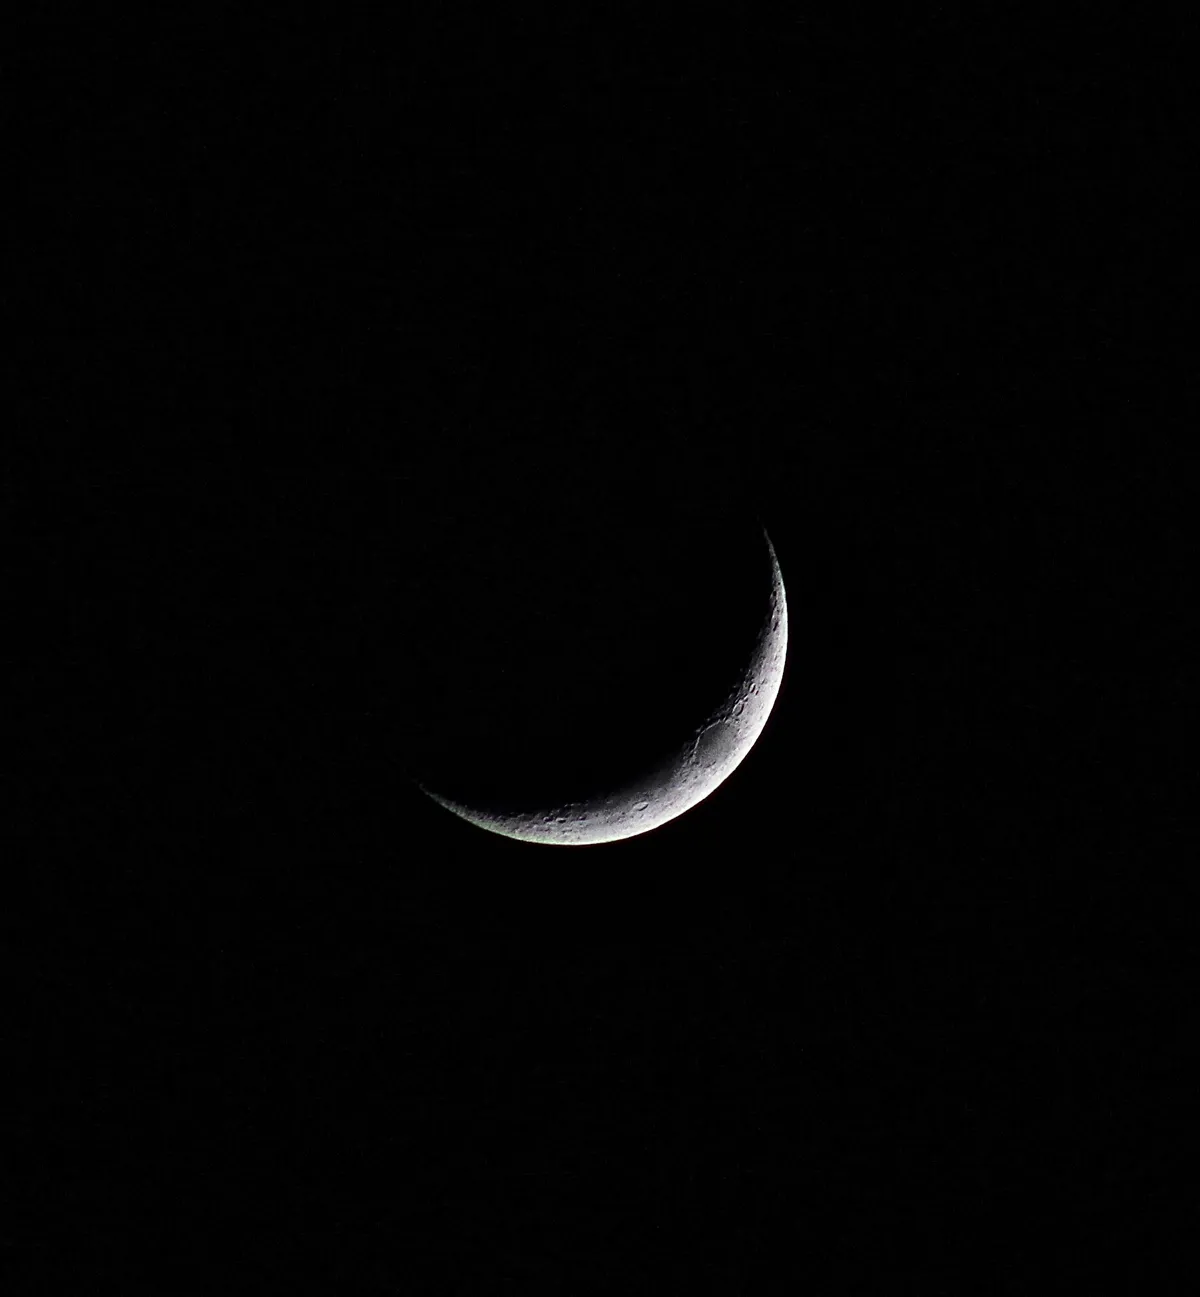 Waxing Crescent by Sarah & Simon Fisher, Bromsgrove, Worcestershire. Equipment: Canon 600D, 300mm